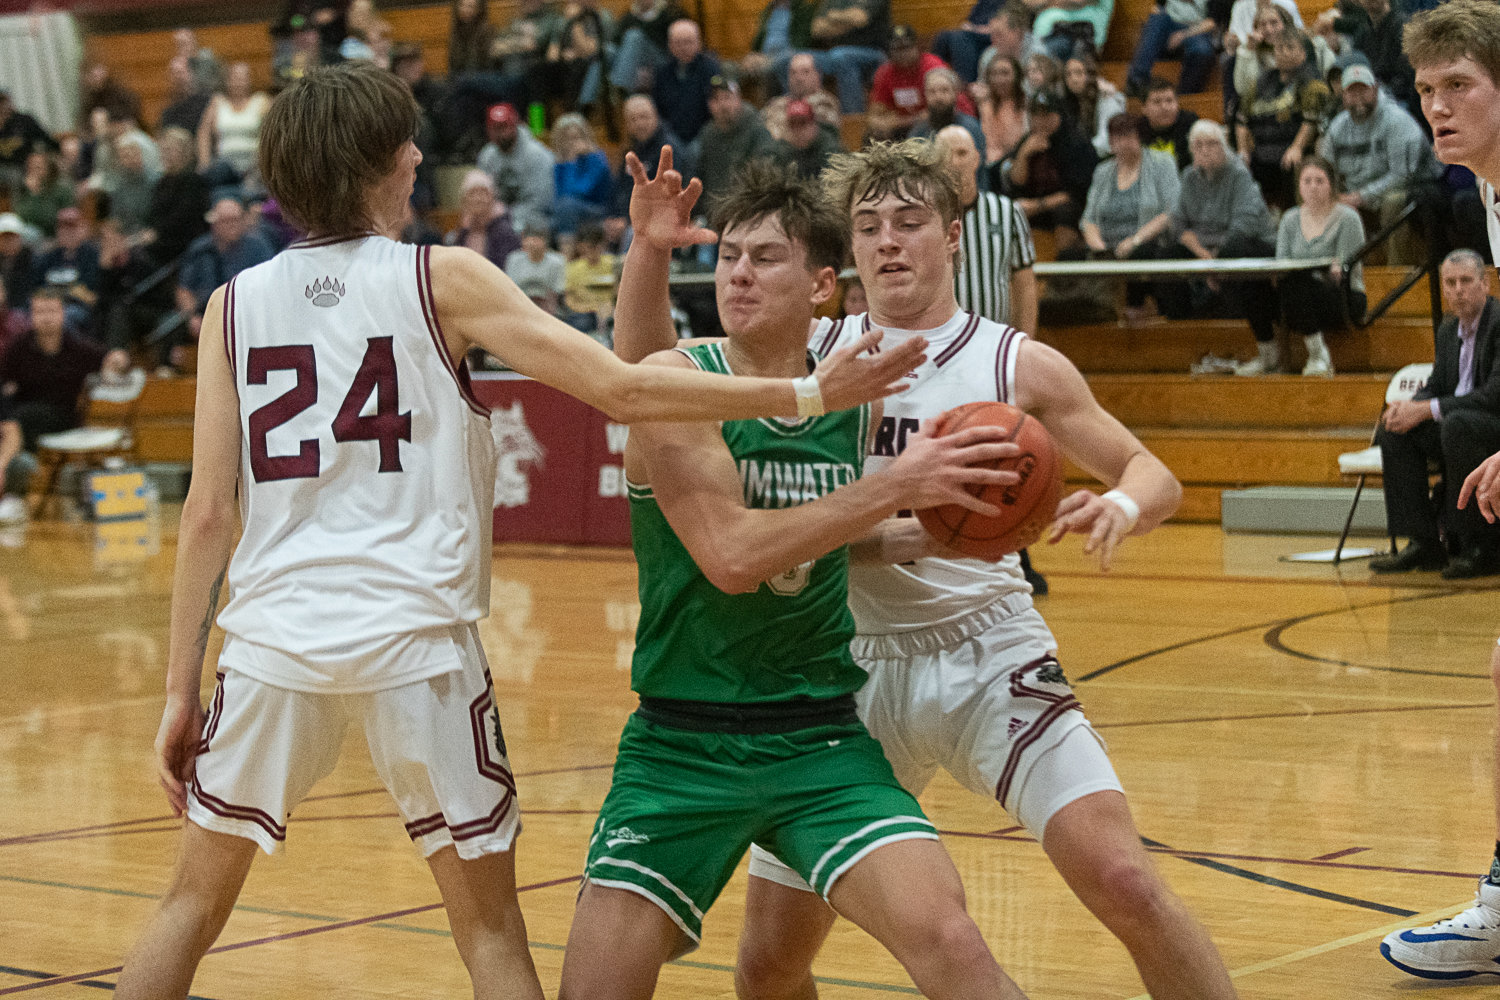 Andrew Collins tries to pass the ball out during the second half of Tumwater's 71-58 win at W.F. West on Jan. 11.